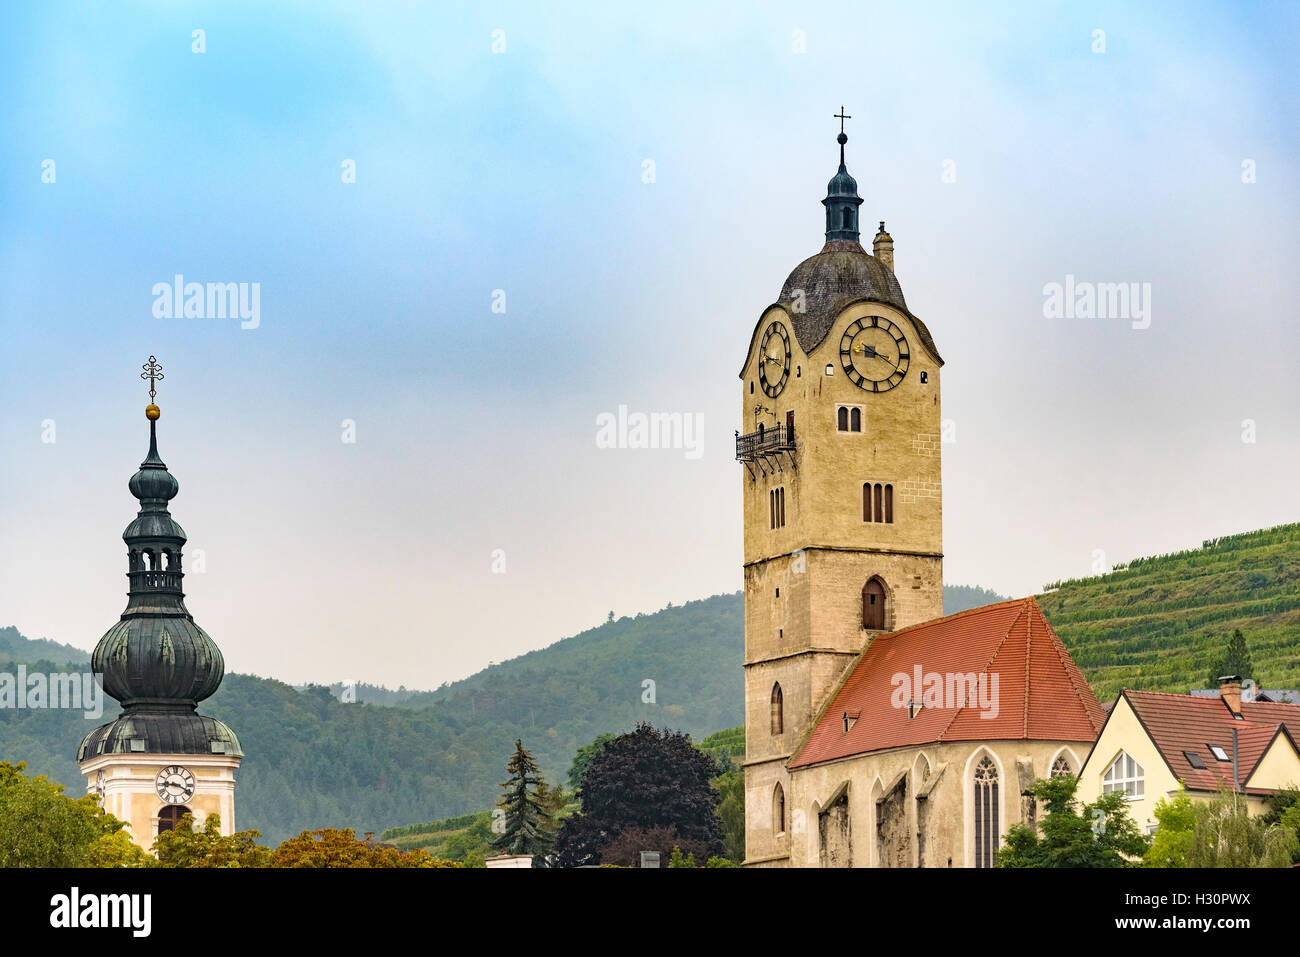 Two church spires along the river Danube, lower Austria. Stock Photo